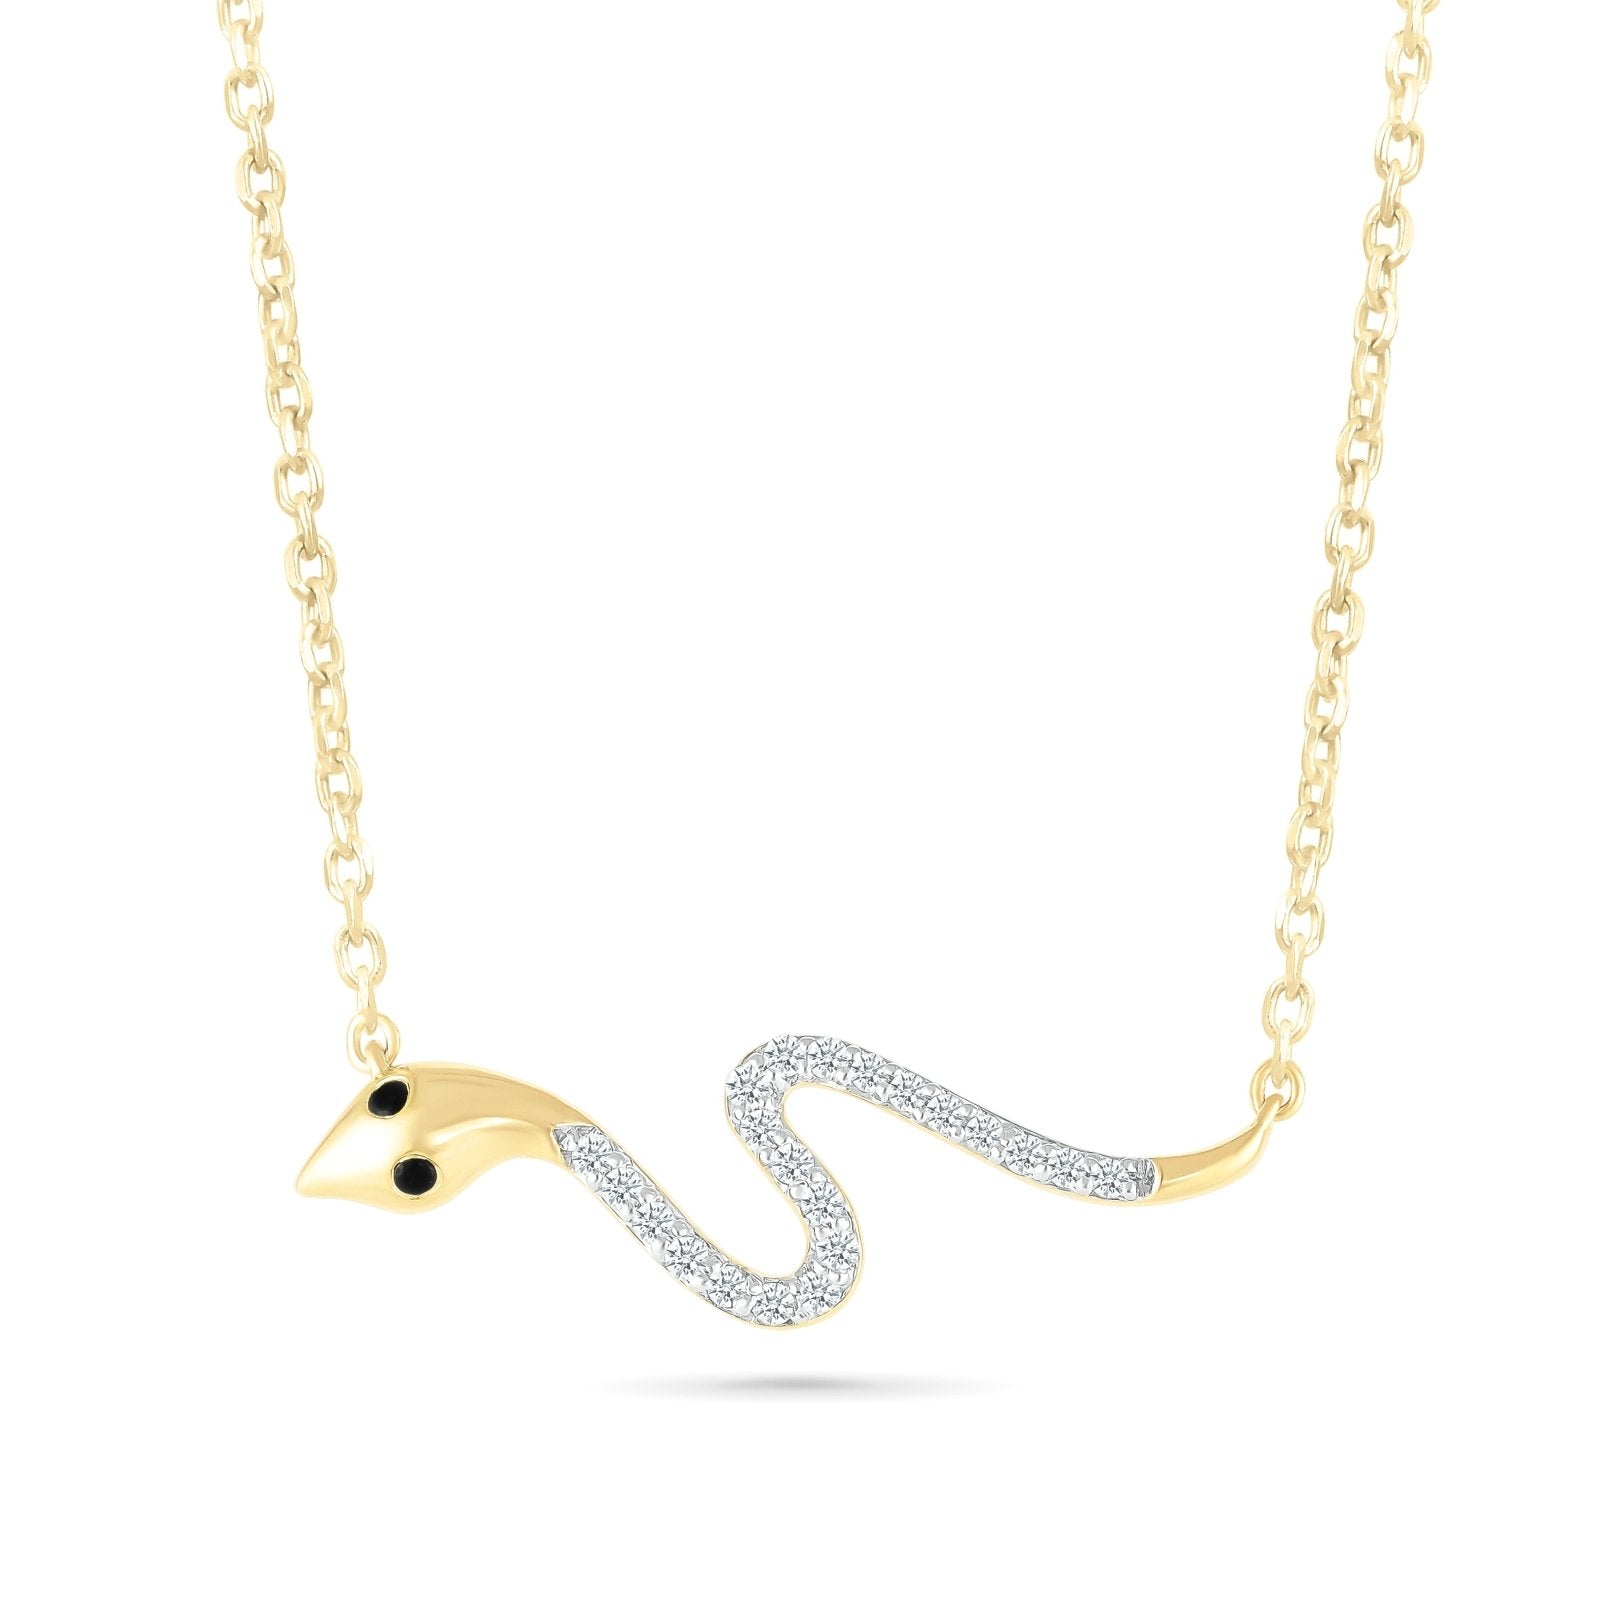 Diamond Snake Necklace Necklaces Estella Collection 32708 10k April Birthstone Colorless Gemstone #tag4# #tag5# #tag6# #tag7# #tag8# #tag9# #tag10#